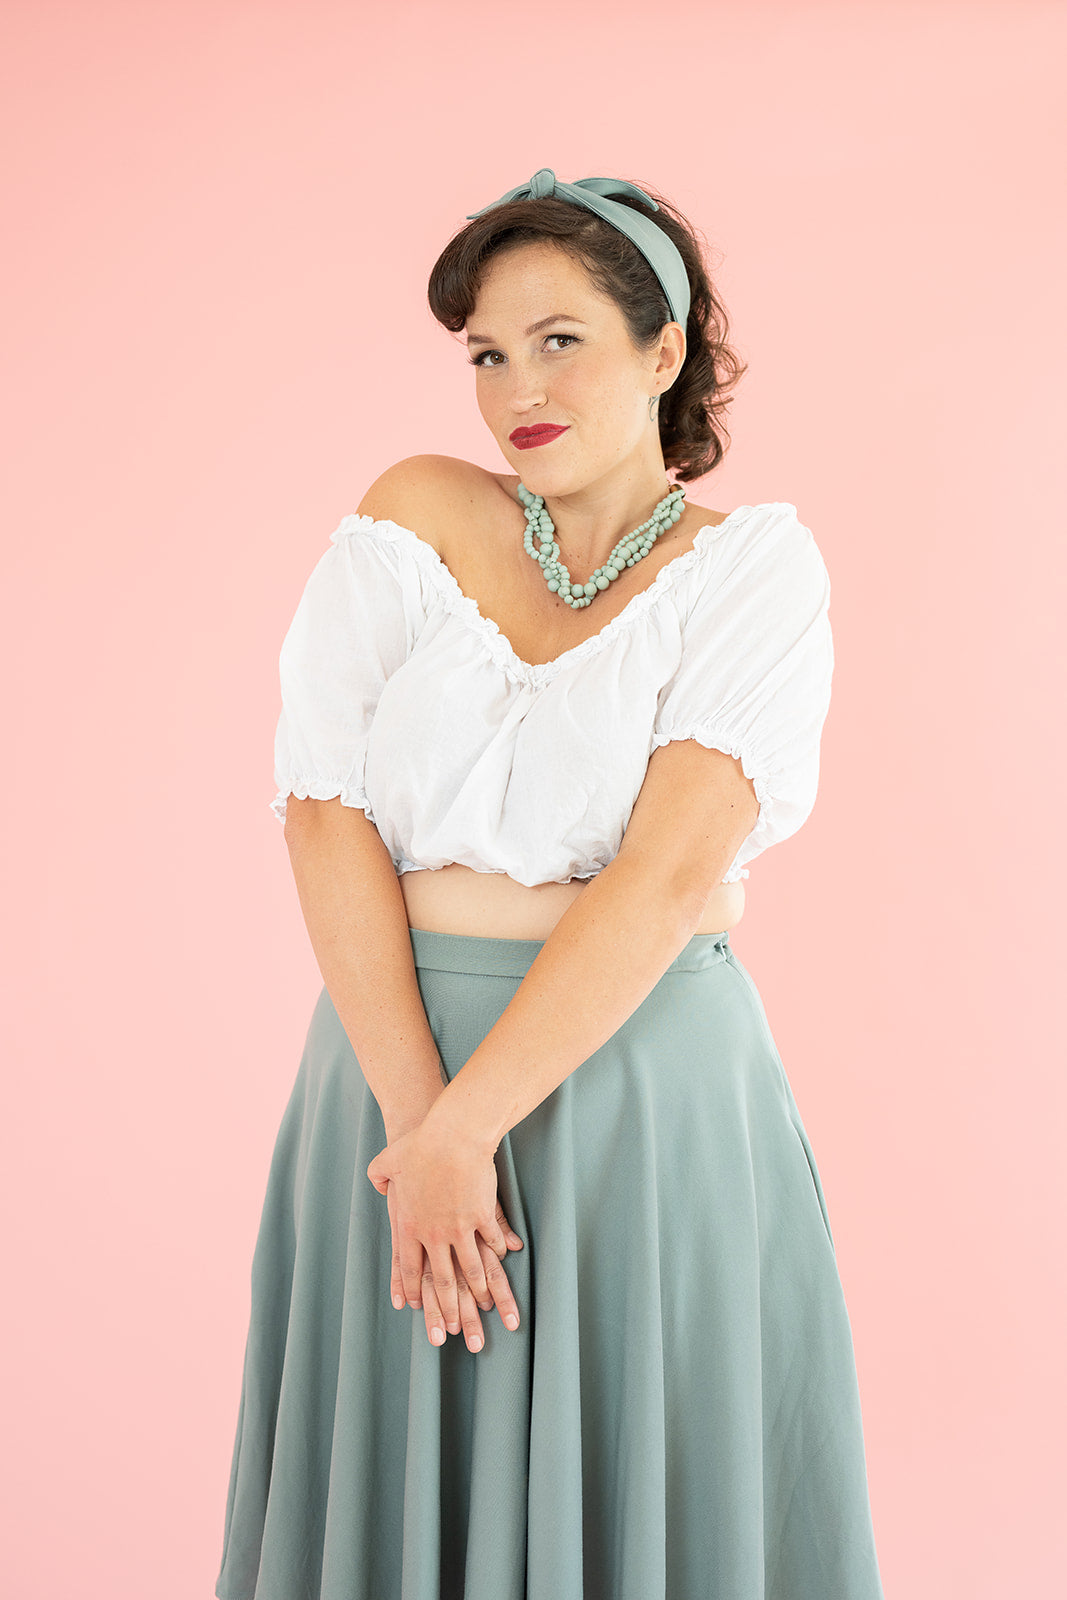 A woman with brown hair looks at the camera. She is wearing a white cropped top with off the shoulder sleeves and a blue skirt.